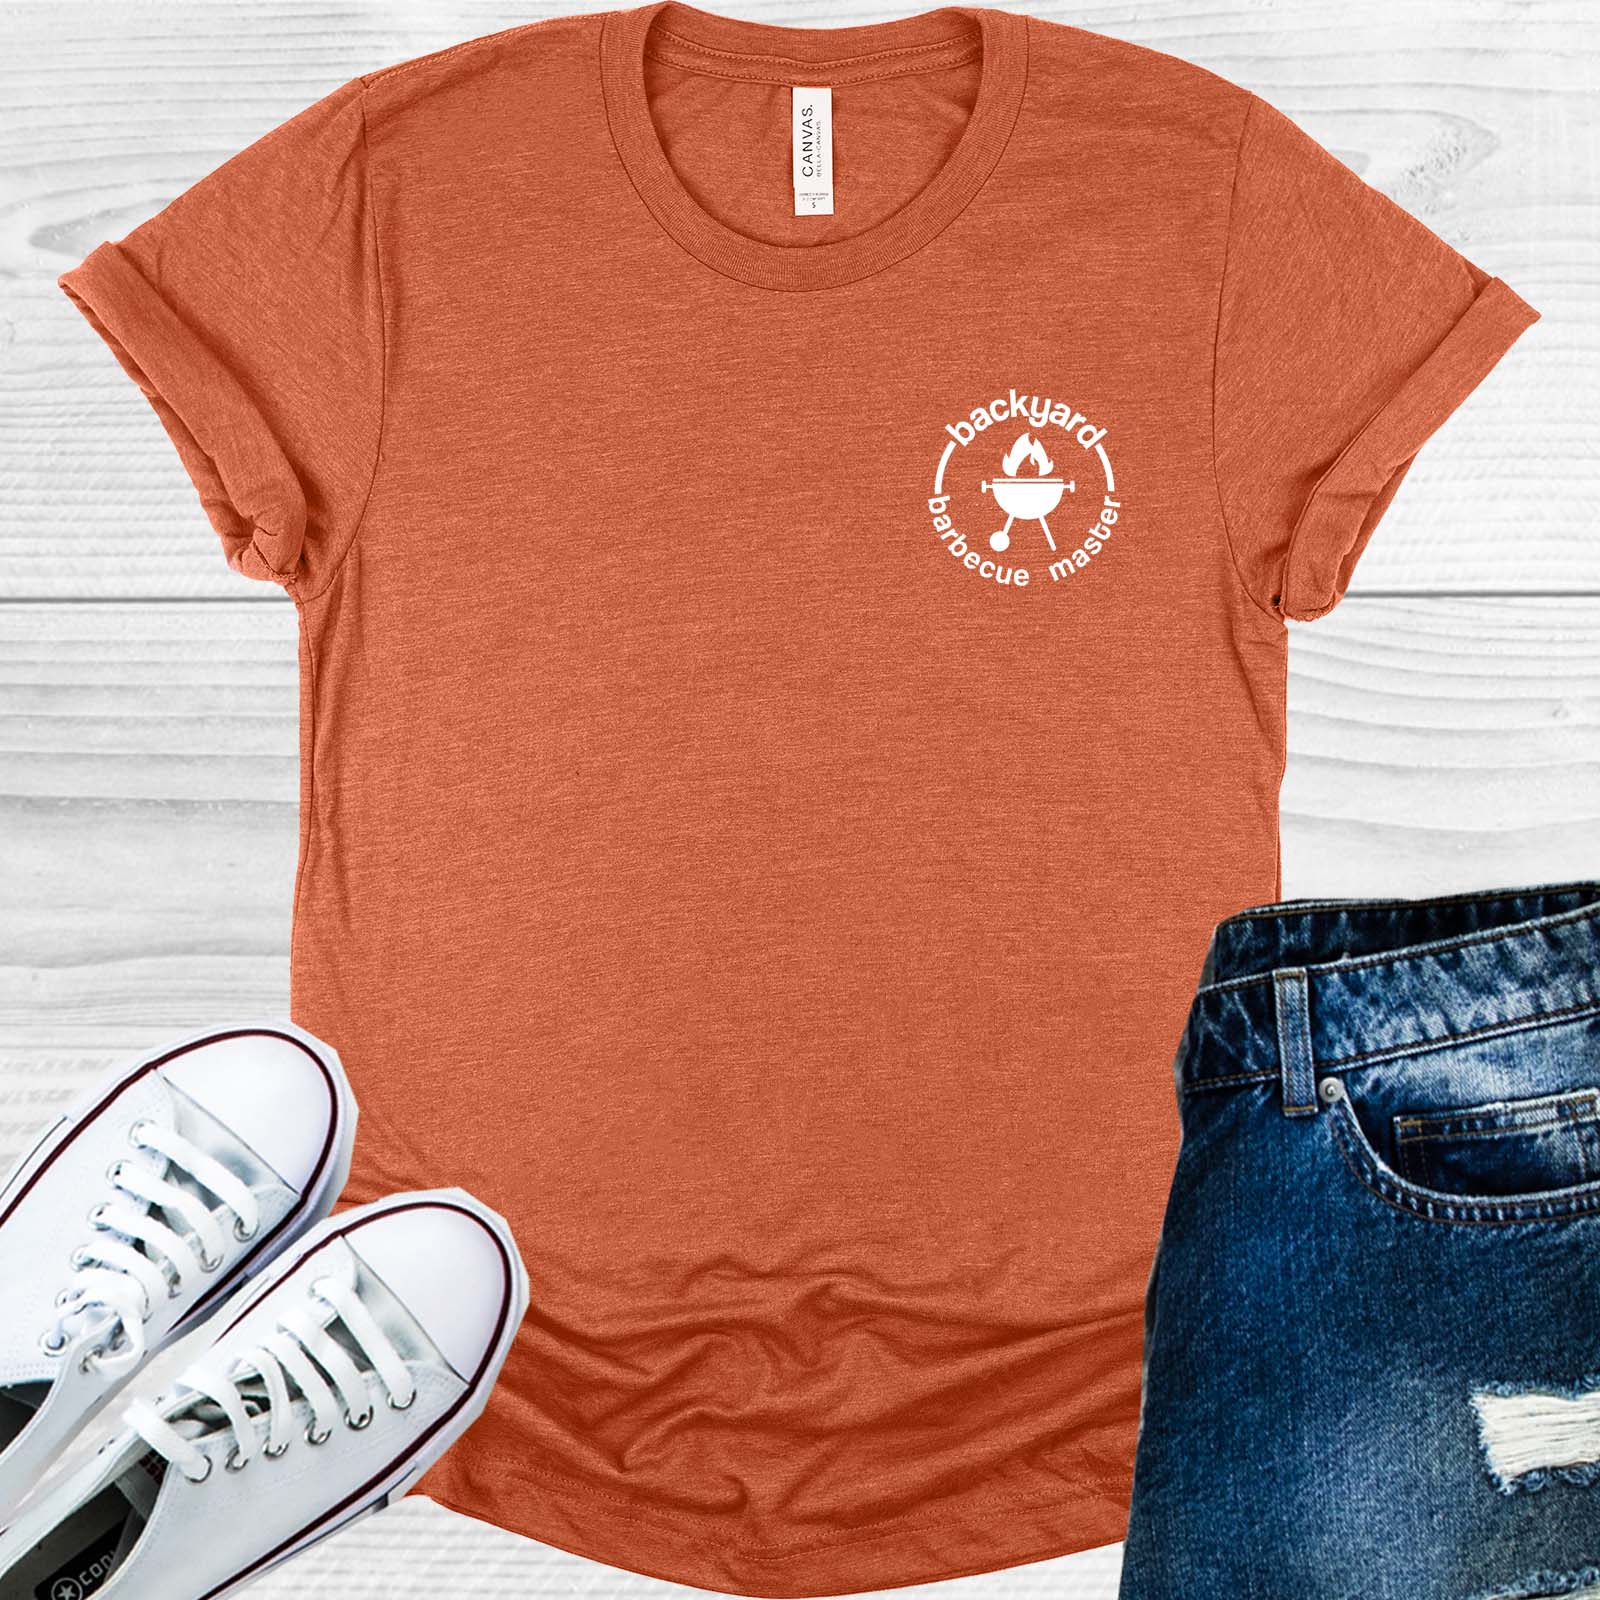 Backyard Barbecue Master Pocket Graphic Tee Graphic Tee